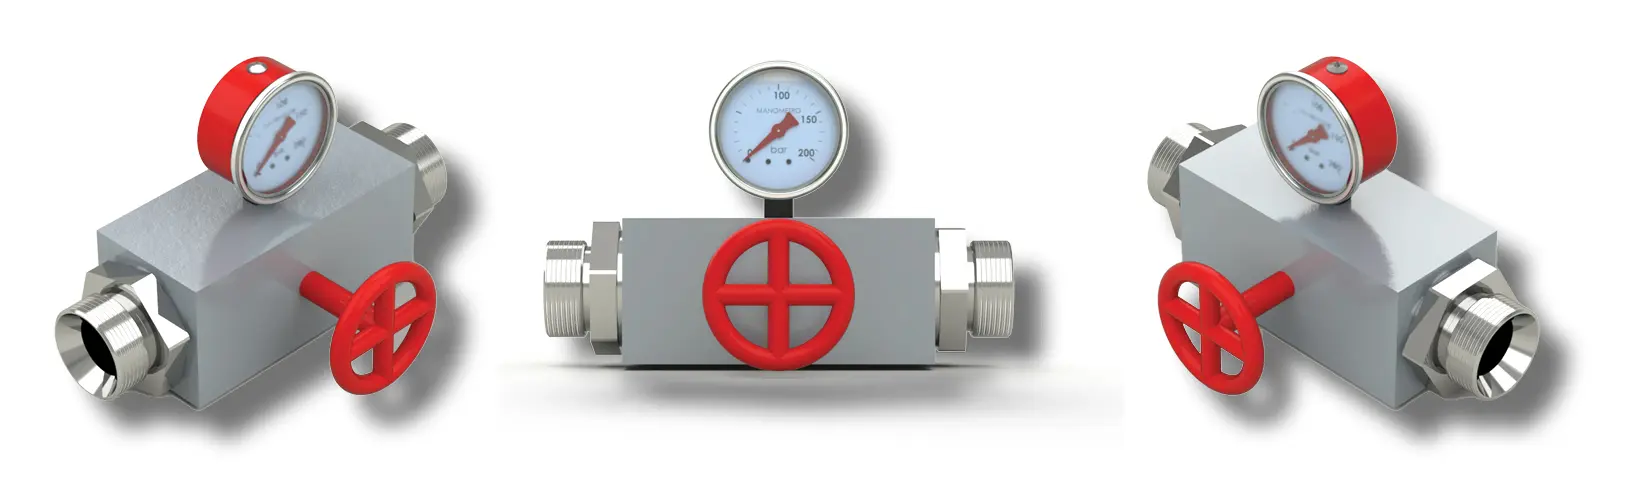 Front Left and Right View Of Flowmeter